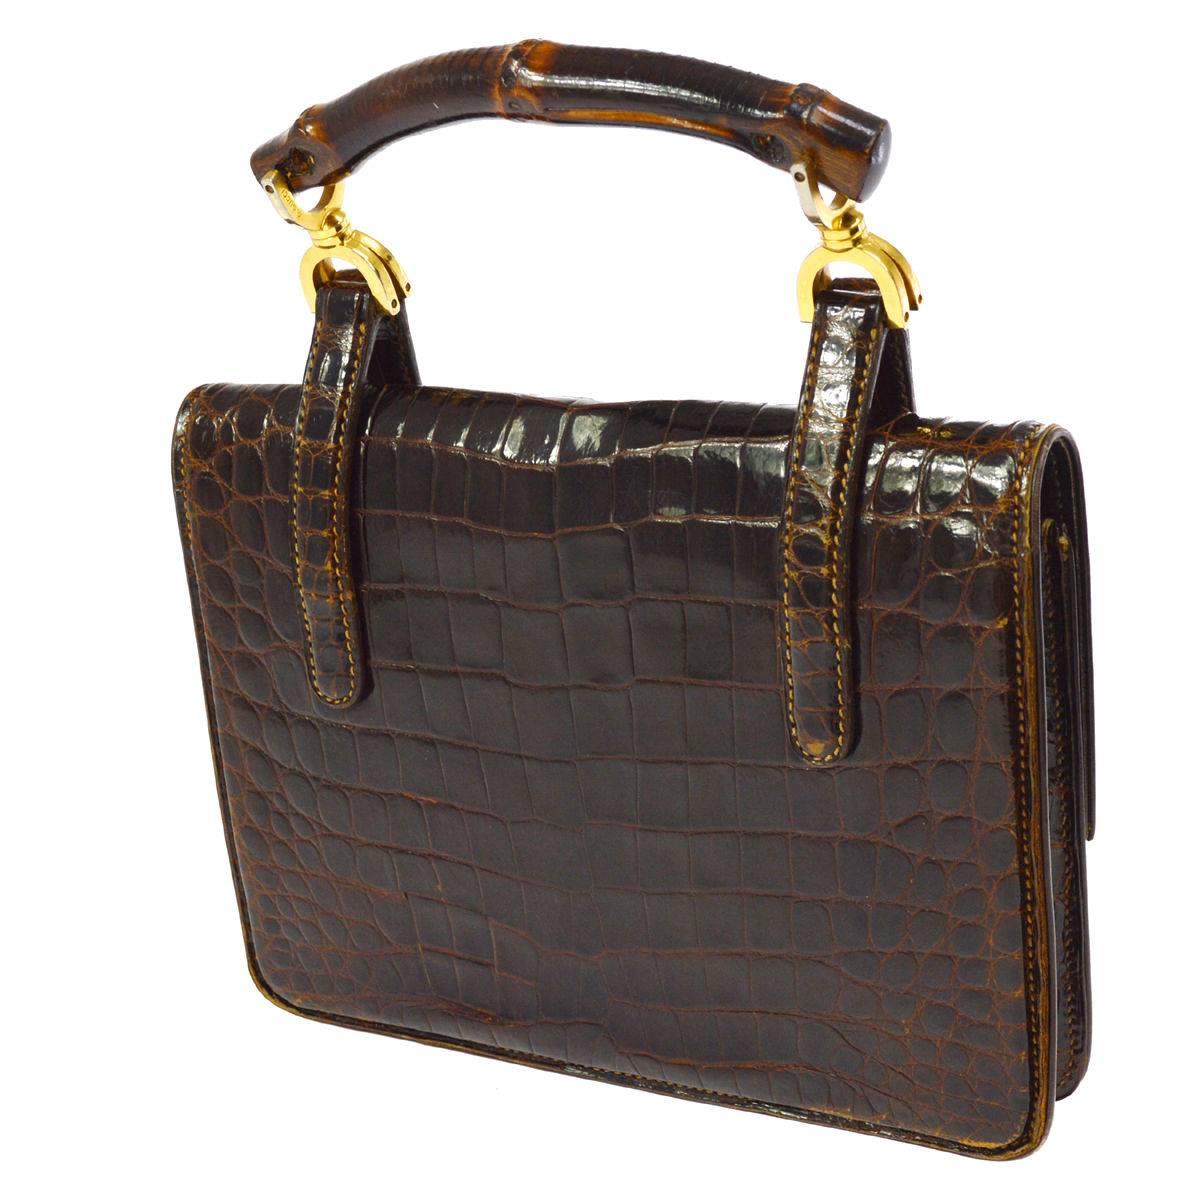 CURATOR'S NOTES

Gucci Vintage Cognac Bamboo Crocodile Evening Kelly Top Handle Satchel Flap Bag  

Crocodile
Bamboo
Gold tone hardware
Turnlock closure
Made in Italy
Handle drop 4"
Measures 9" W x 6.25" H x 3" D